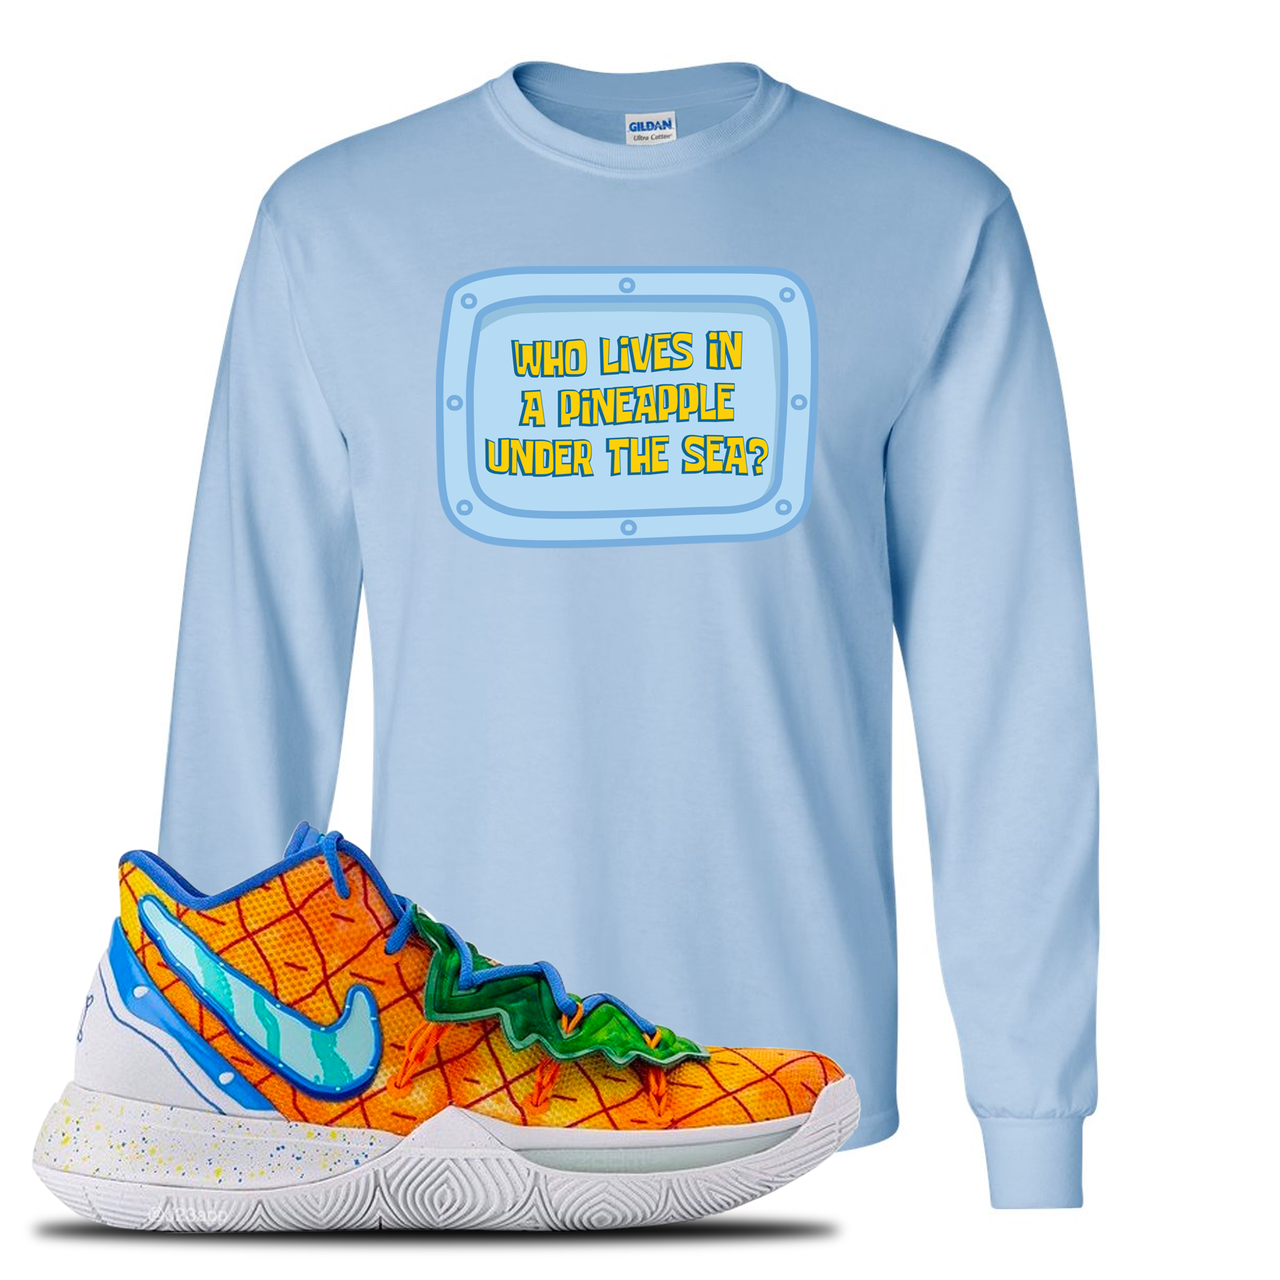 Kyrie 5 Pineapple House Who Lives in a Pineapple Under the Sea? Light Blue Sneaker Hook Up Longsleeve T-Shirt